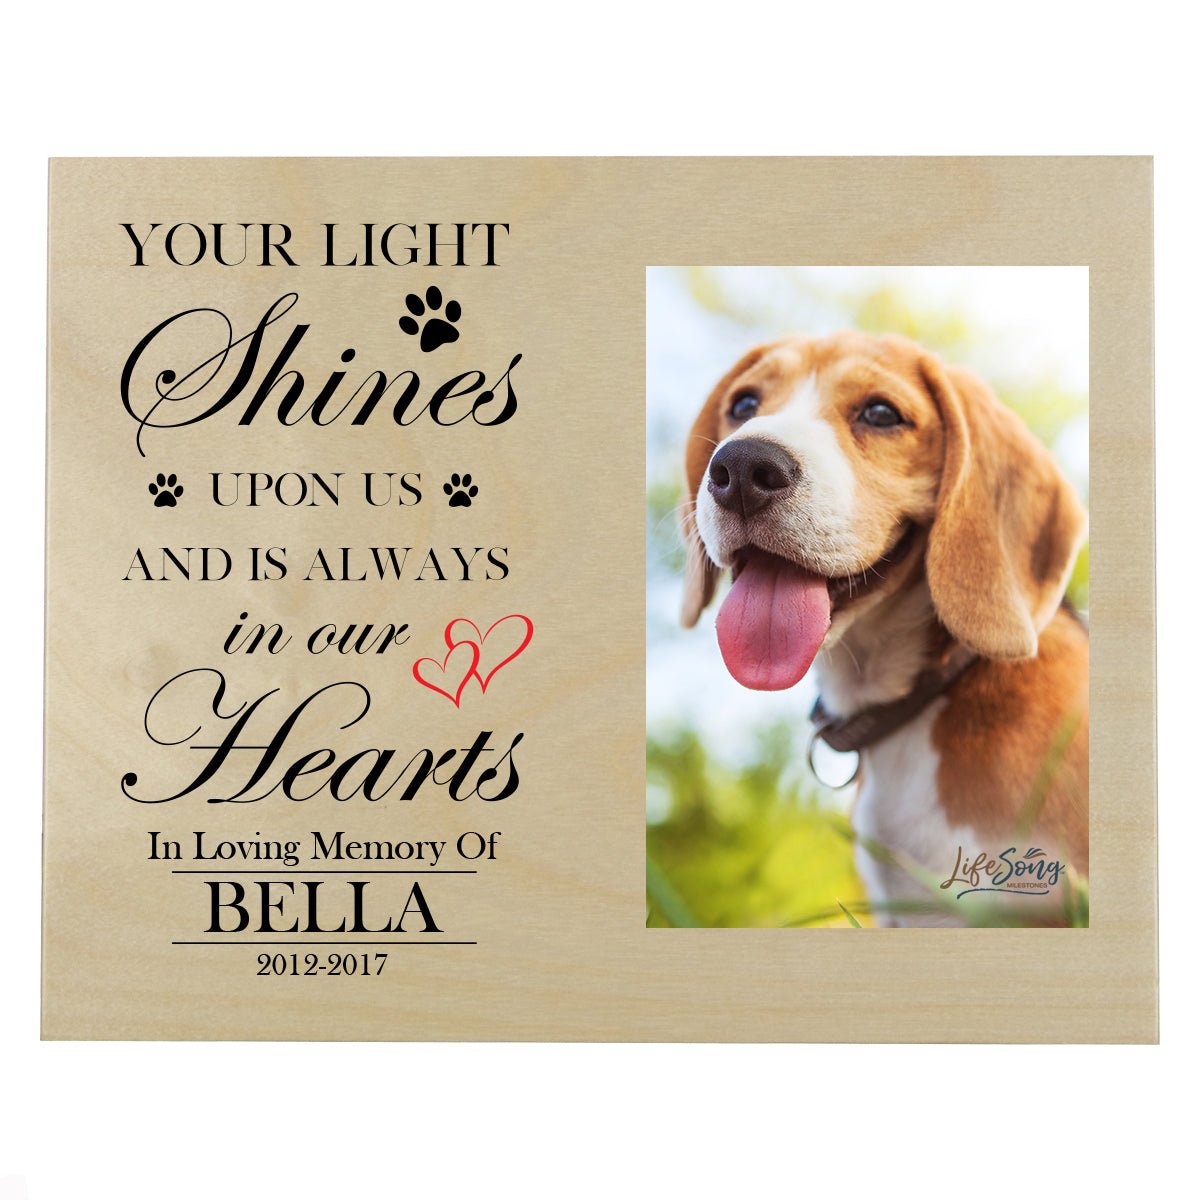 Pet Memorial Photo Wall Plaque Décor - Your Light Shines Upon Us - LifeSong Milestones